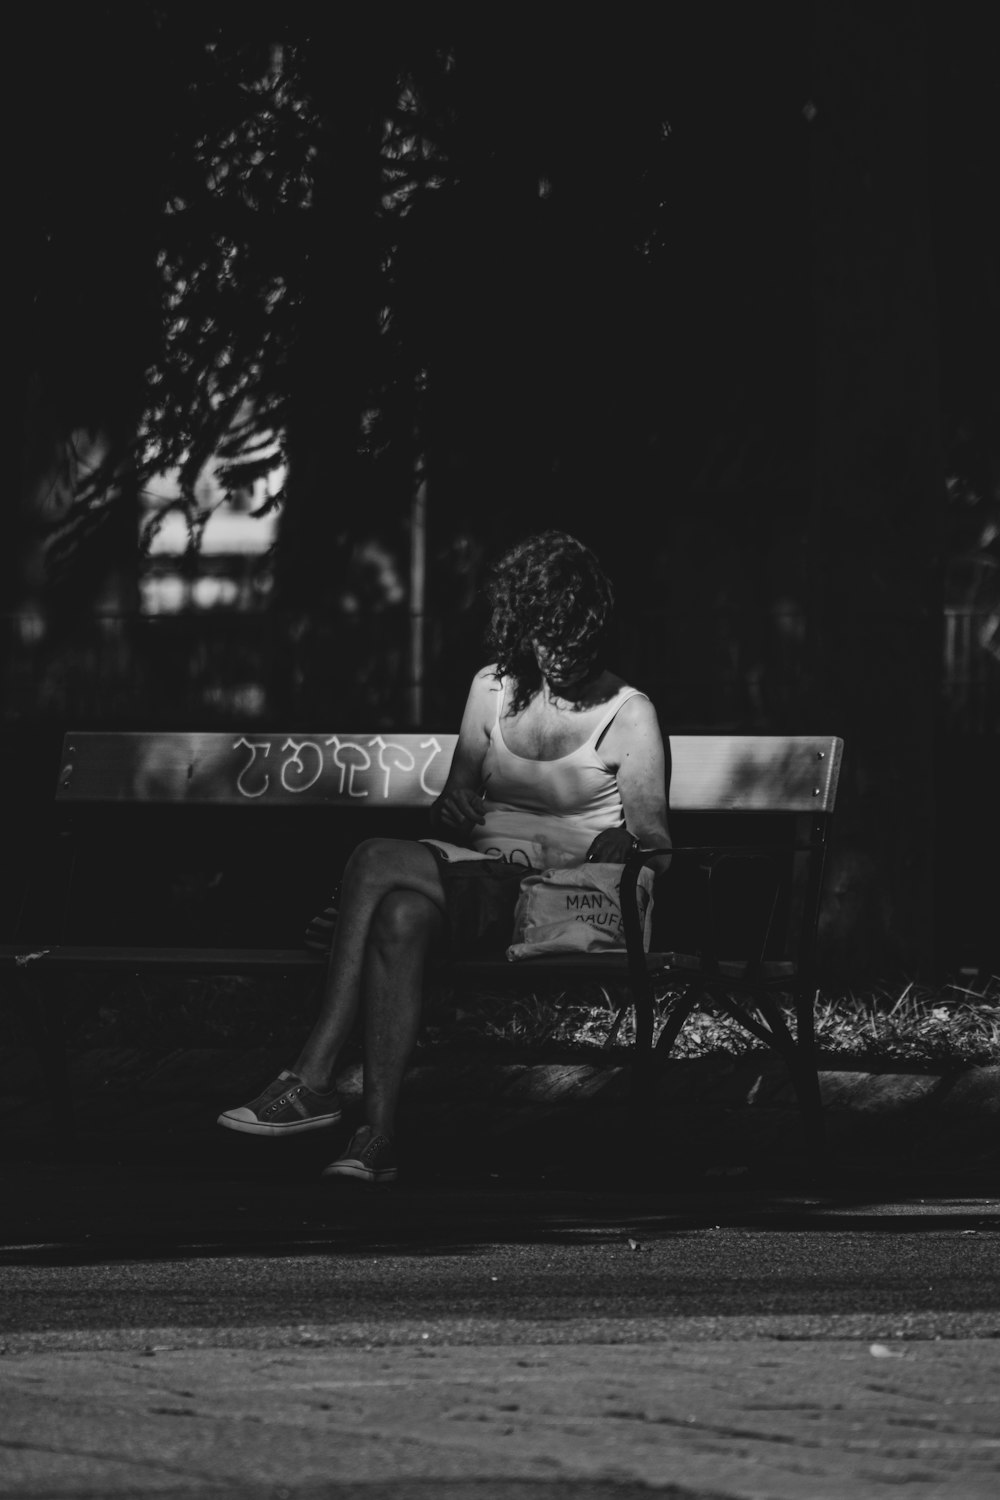 grayscale photo of woman sitting on bench